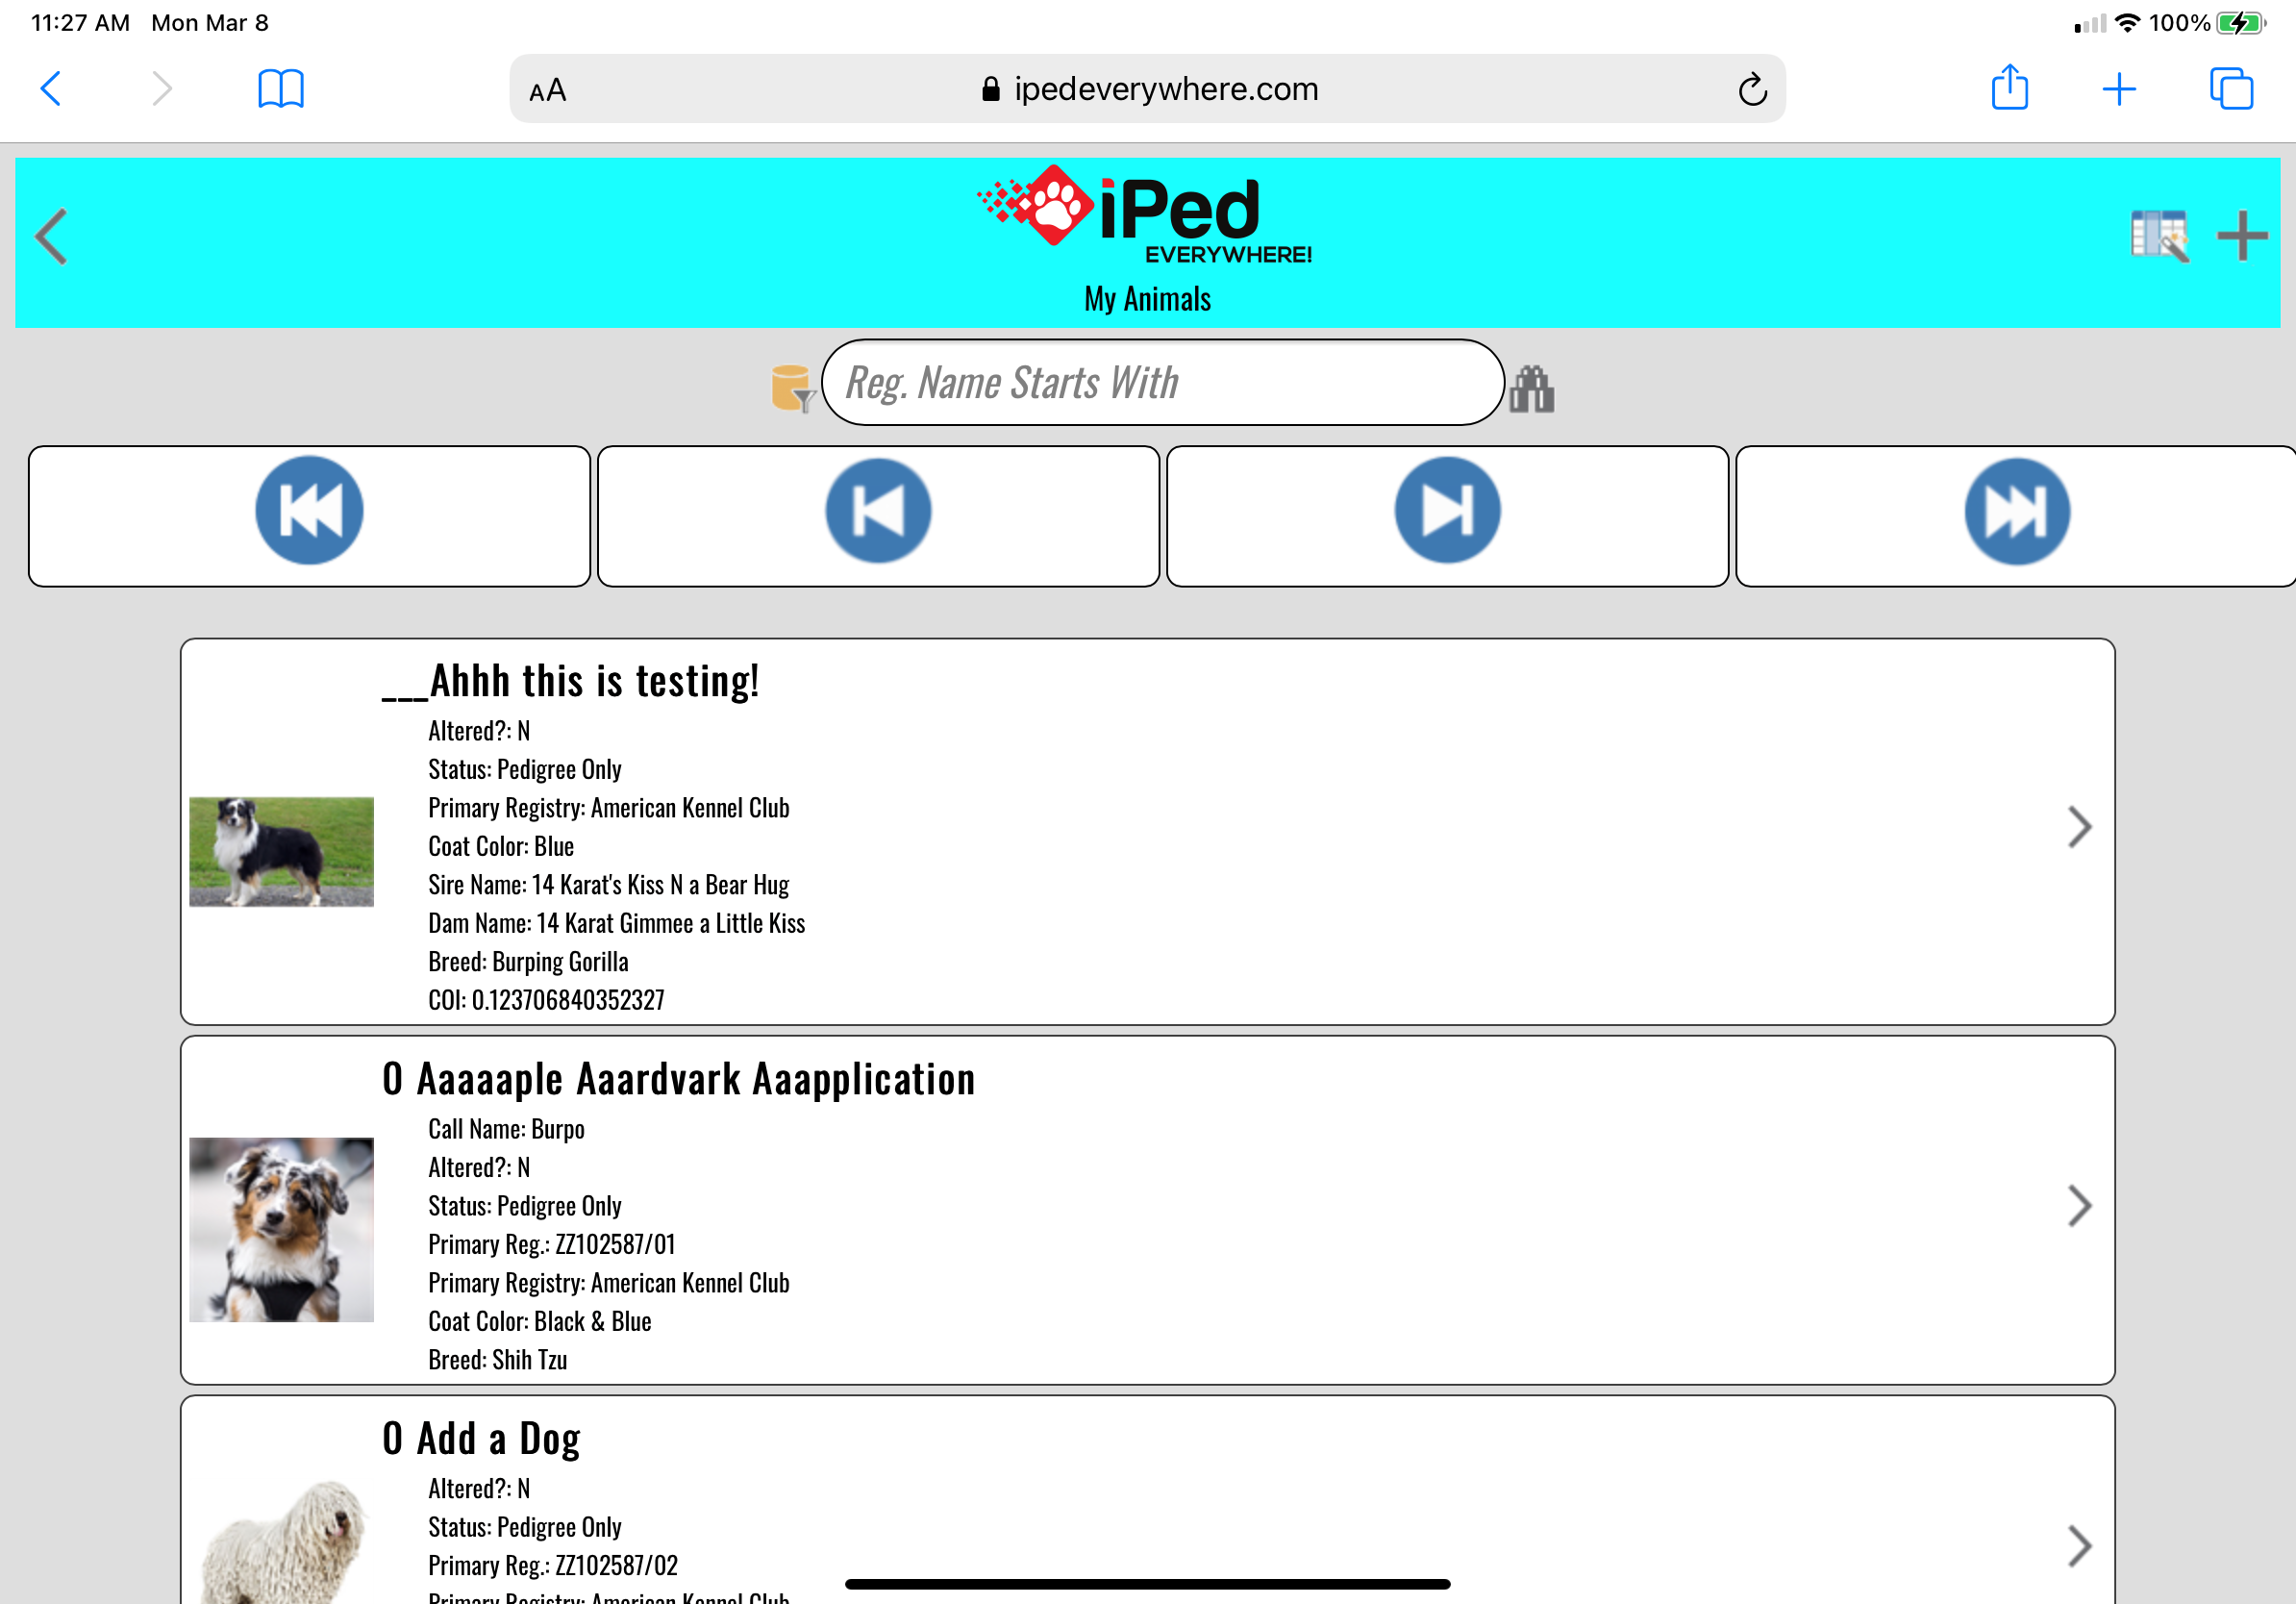 iPed Everywhere for device browser